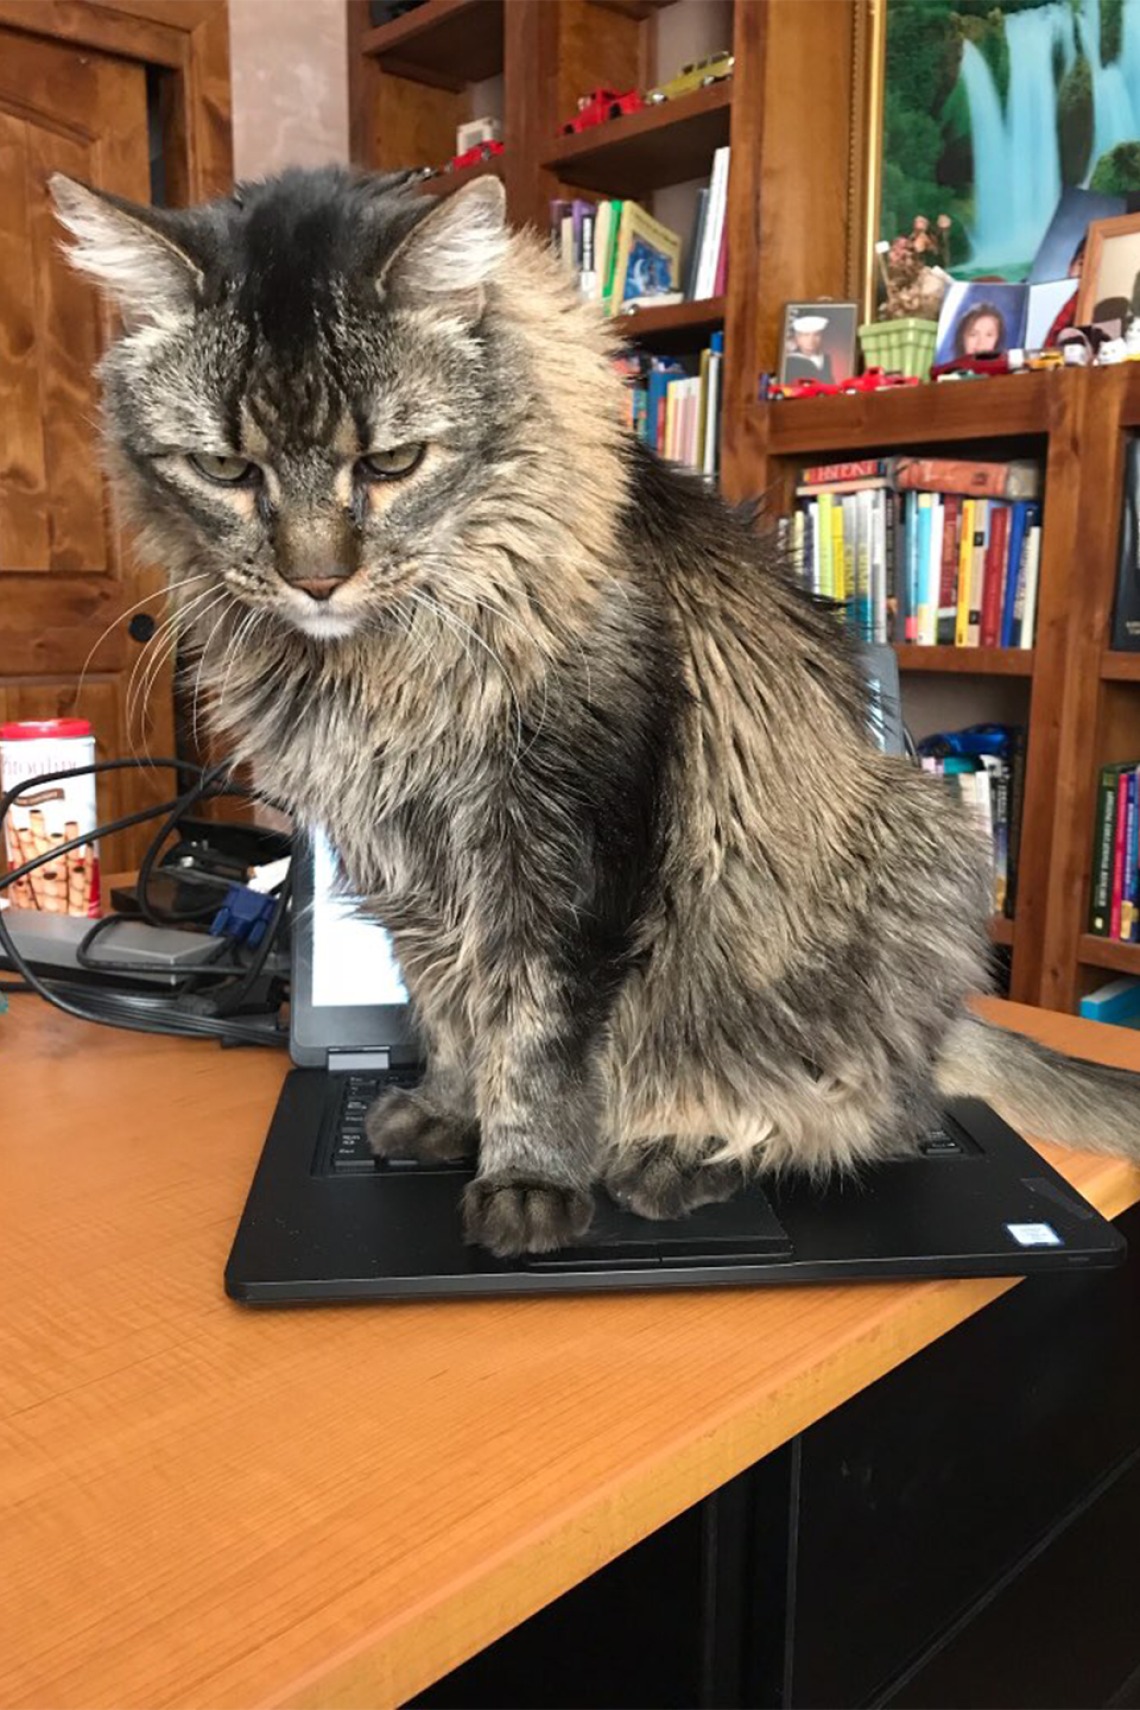 Dimmu the cat is hard at work. Photo submitted by Maria A. Telles, PhD, assistant to the department head at the College of Medicine – Tucson’s Department of Medical Imaging.